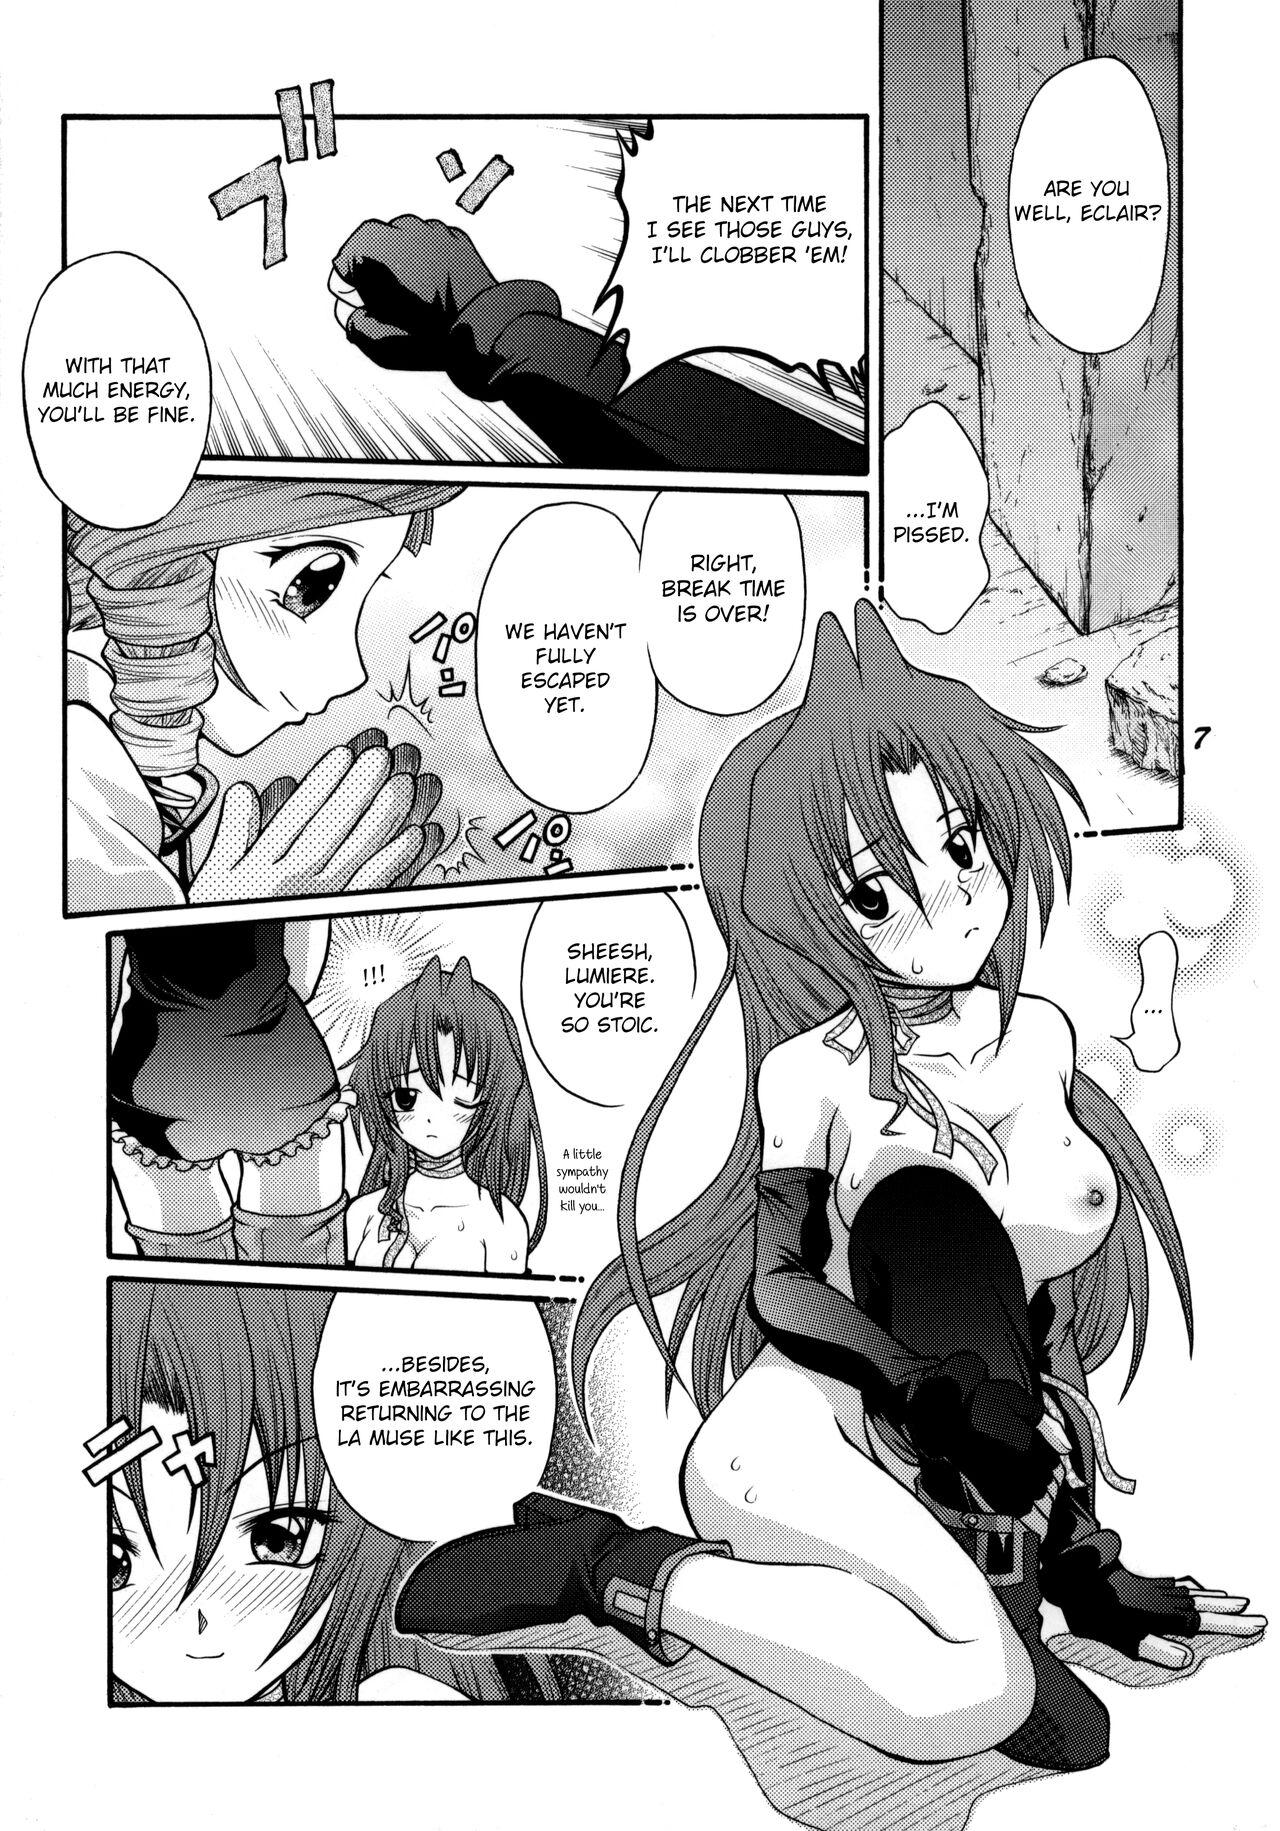 Yanks Featured Anna Toko mo Konna Toko mo Elegant♪ | Both Places Like That and Places Like This Are Elegant♪ - Kiddy grade Best Blow Job - Page 6